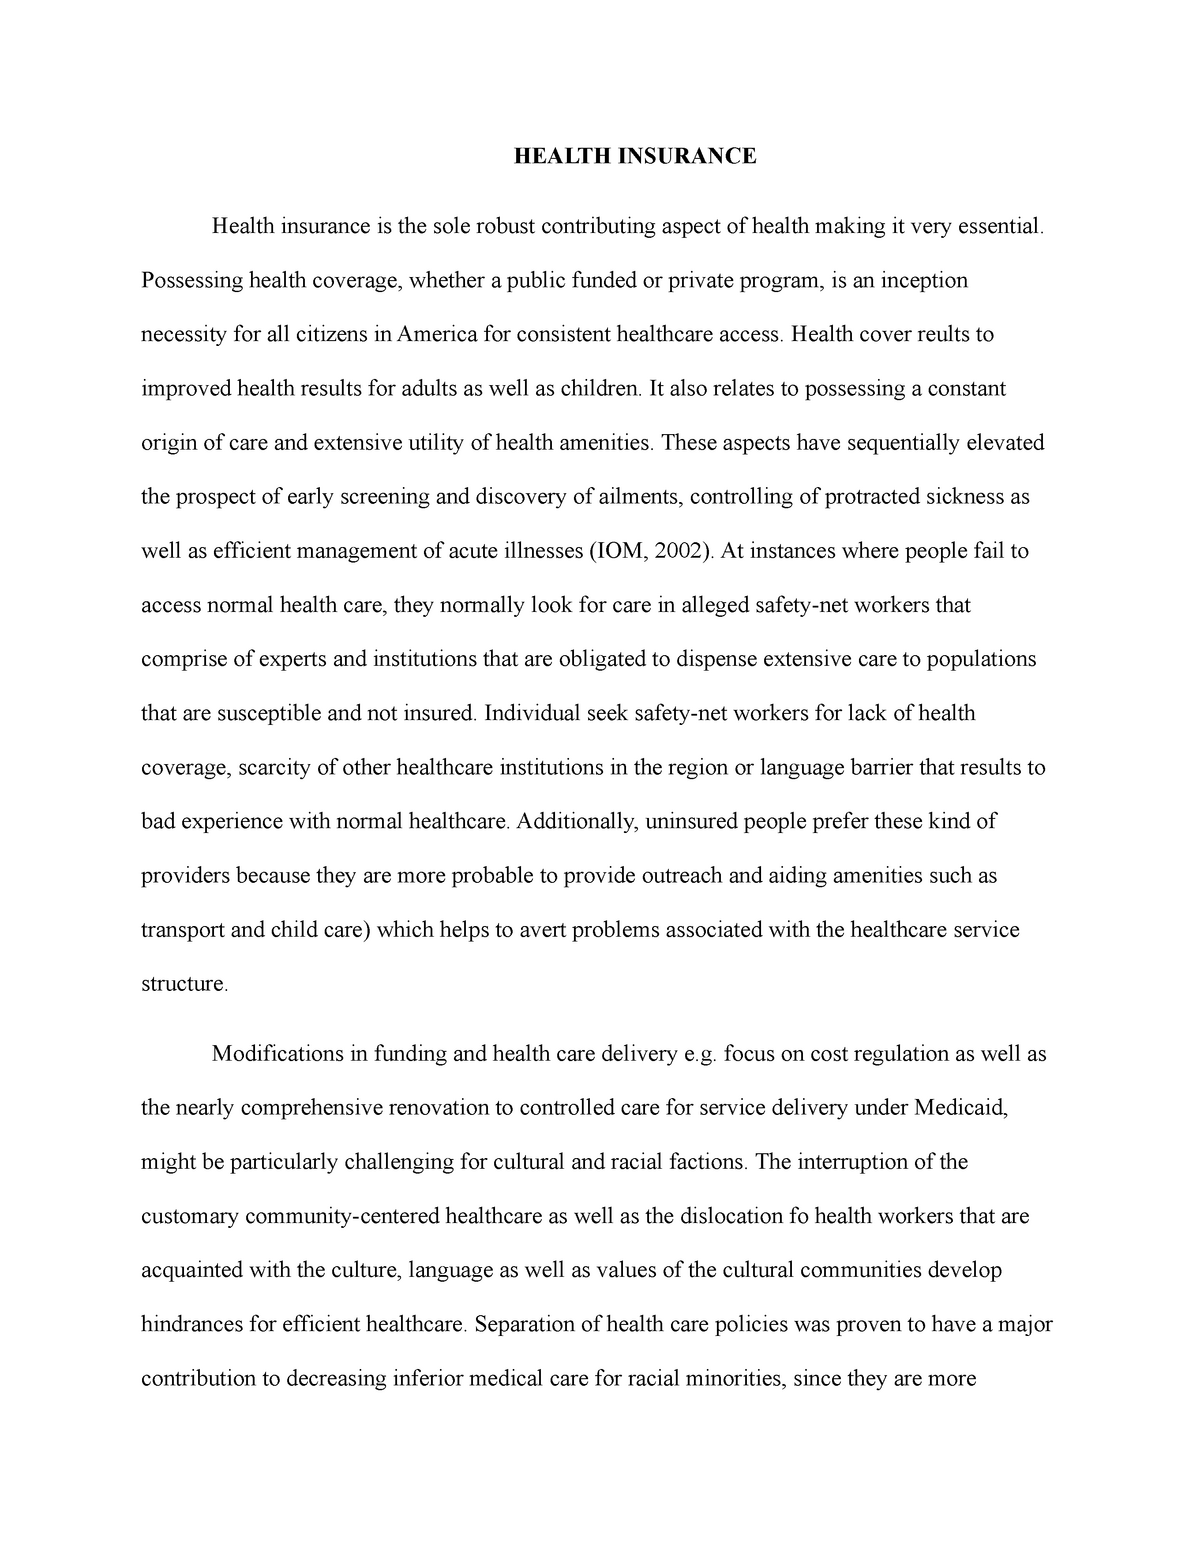 health insurance research essay